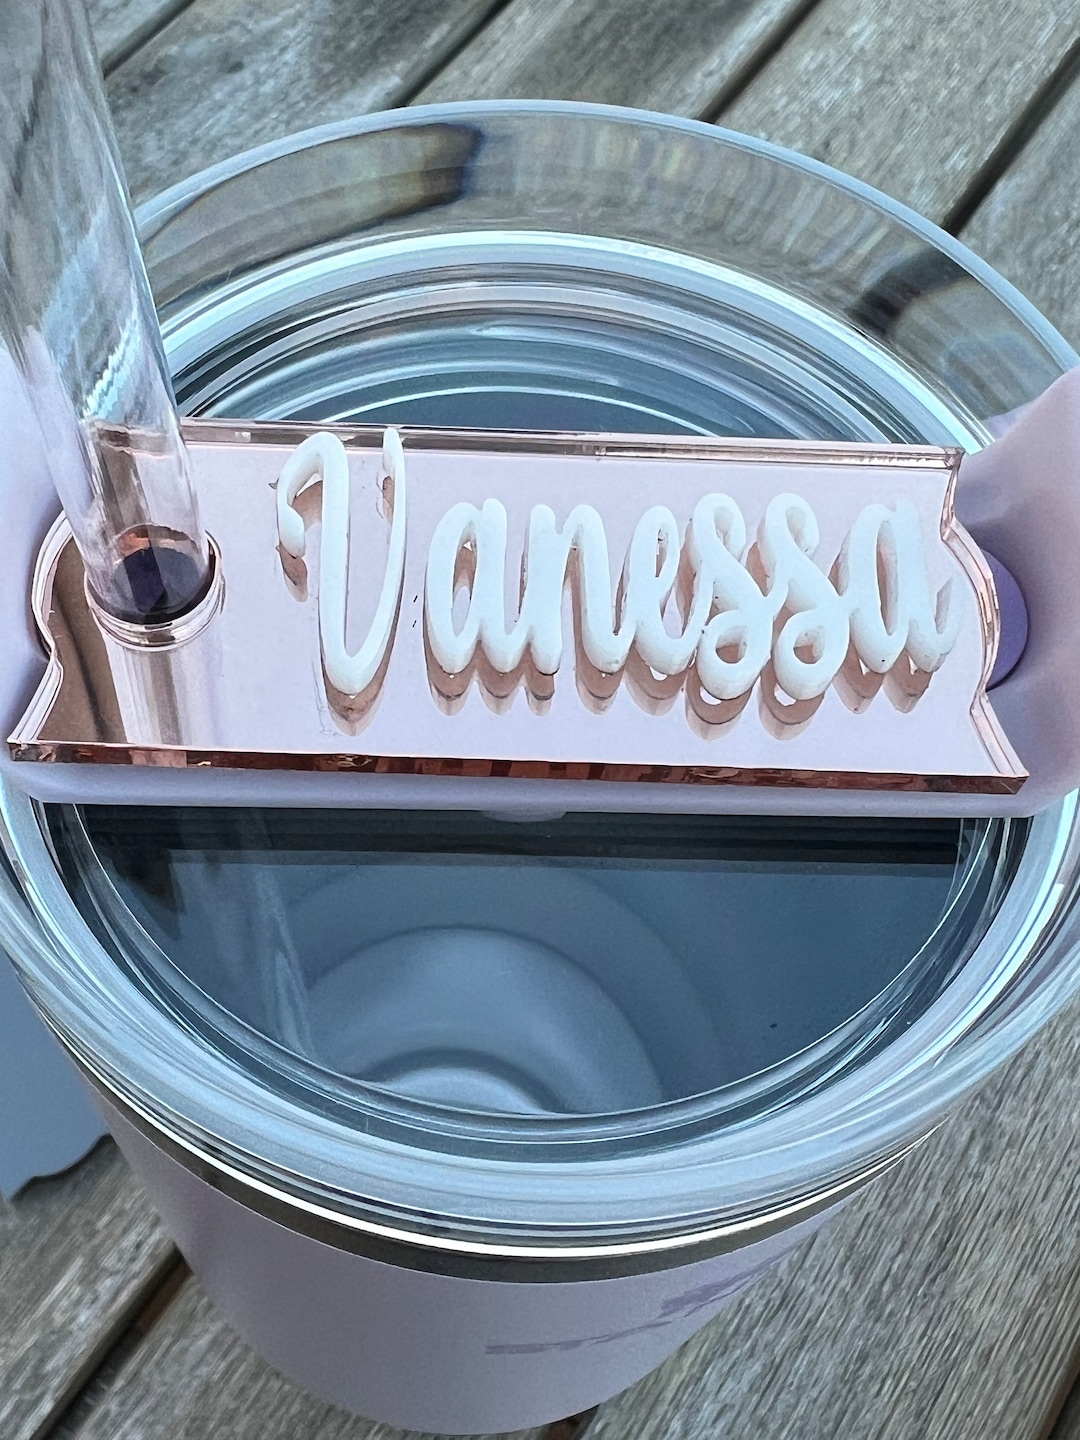 40 oz Stanley cup name plates – Bailey's Branches